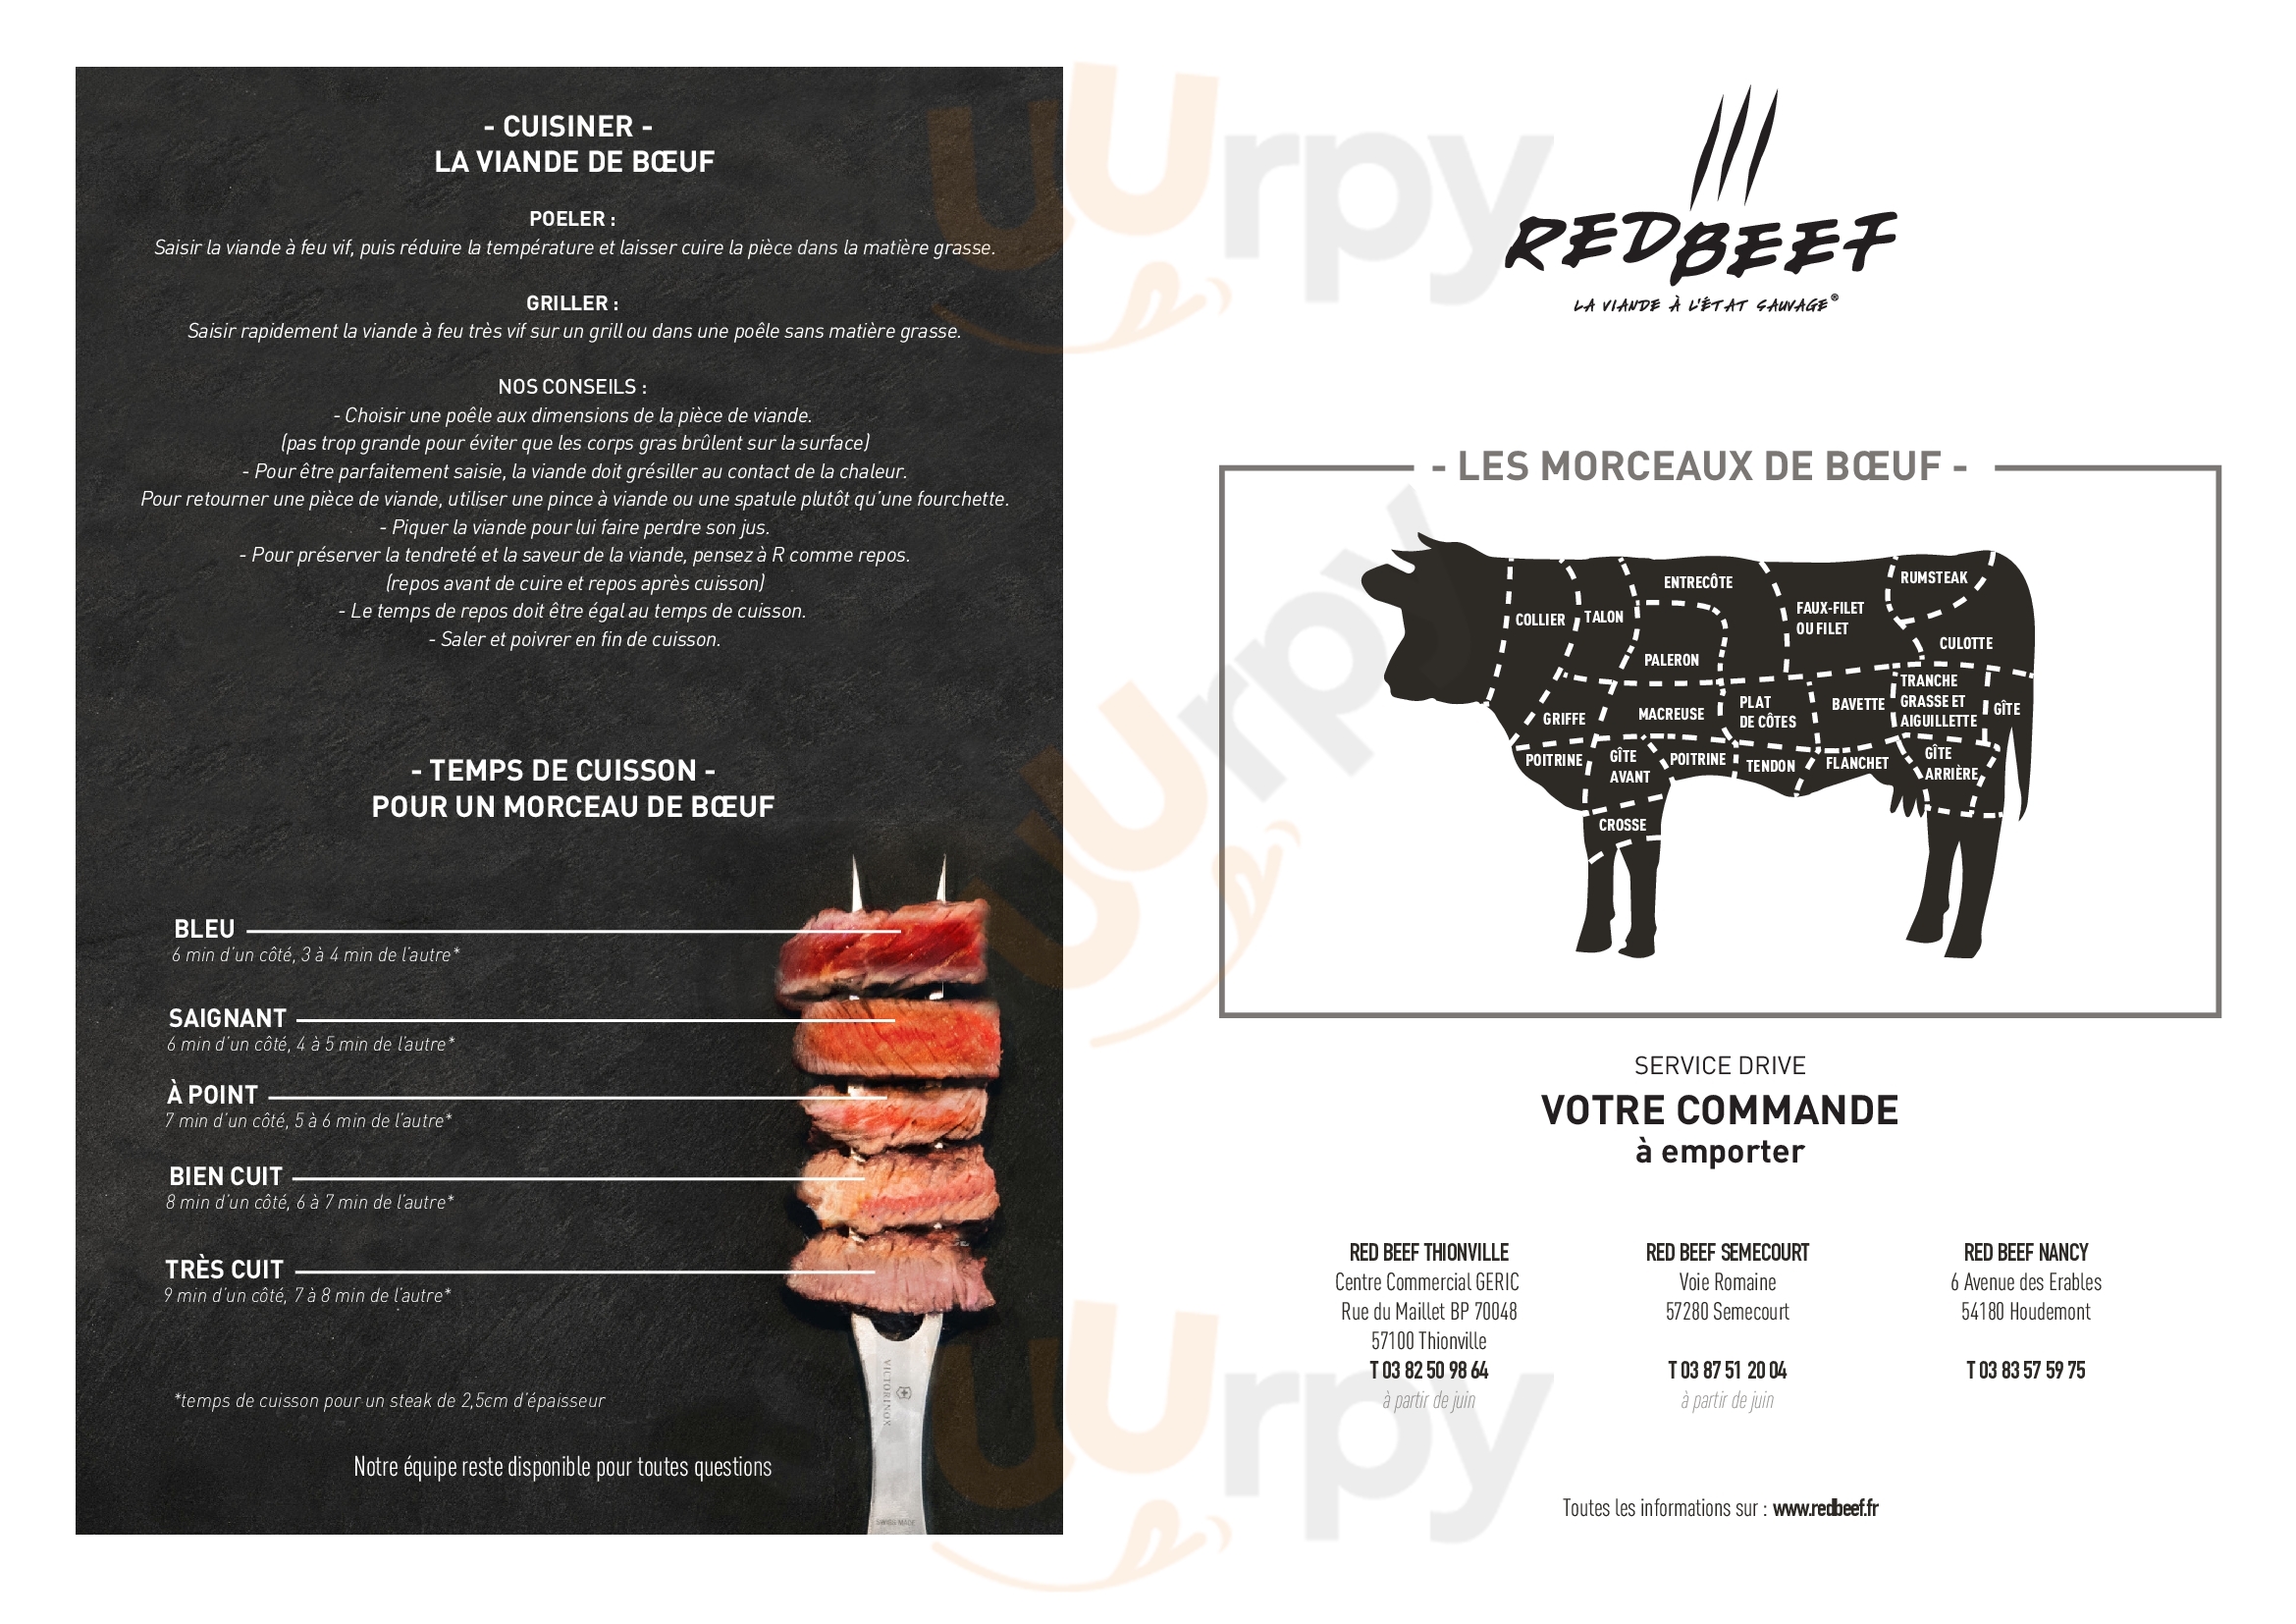 Le Grand Café Red Beef Luxembourg Menu - 1